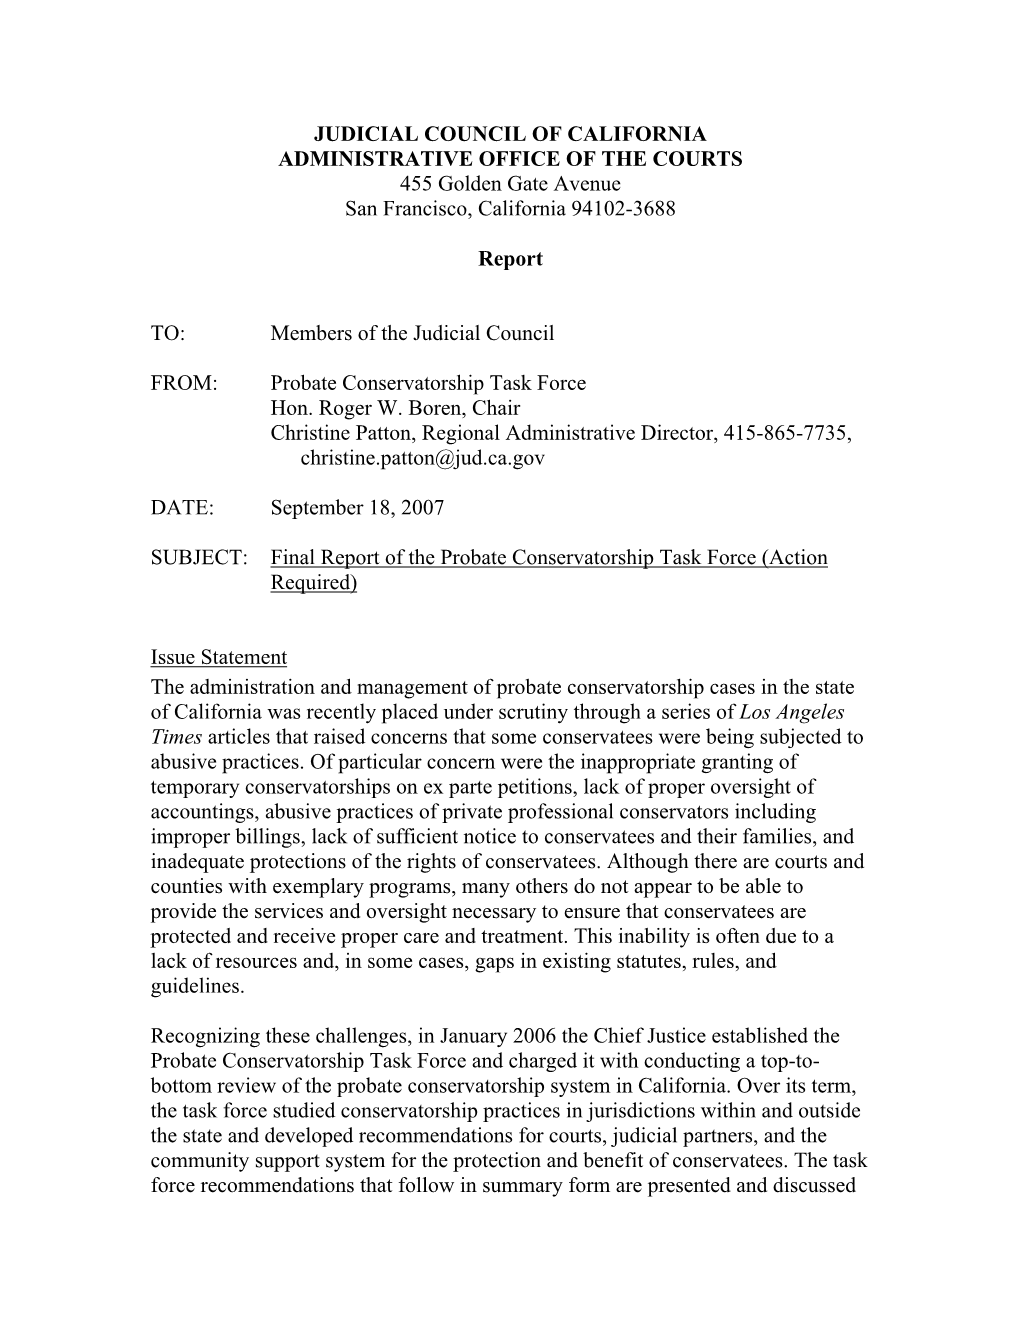 Final Report of the Probate Conservatorship Task Force (Action Required)